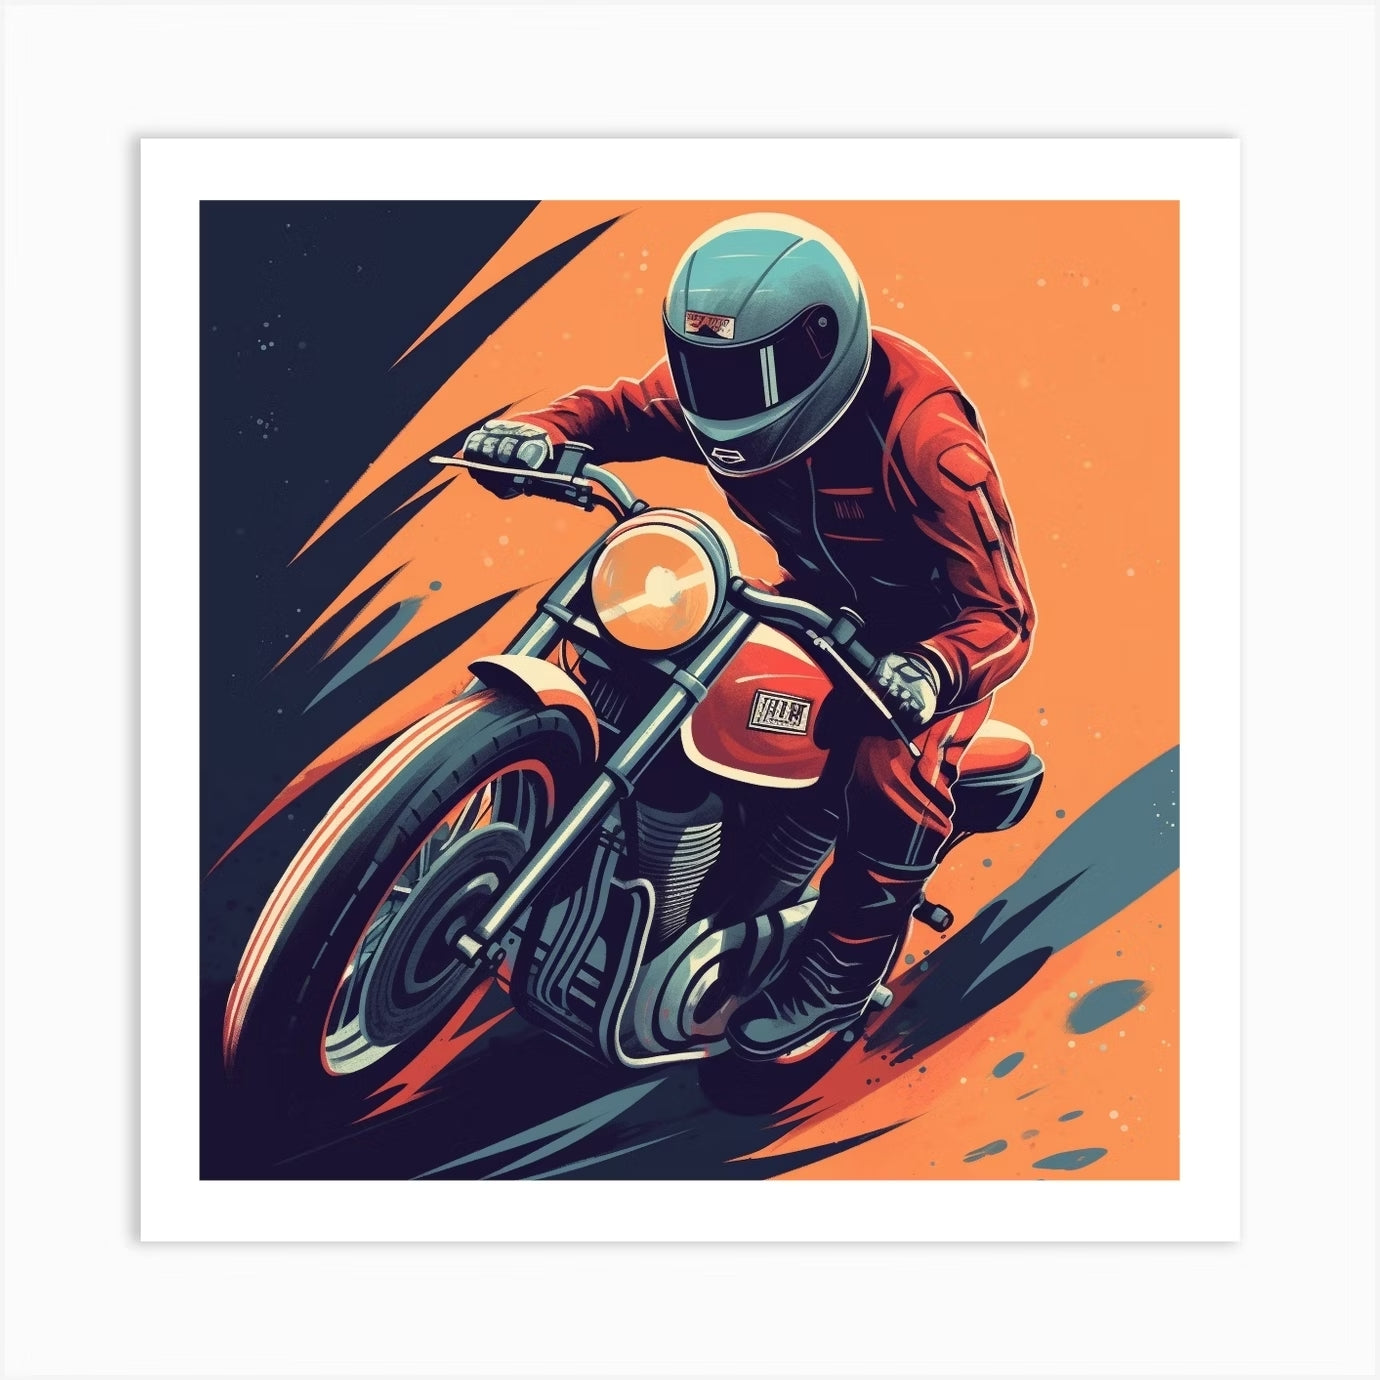 Artwork inspiring the motorcycle enthusiast